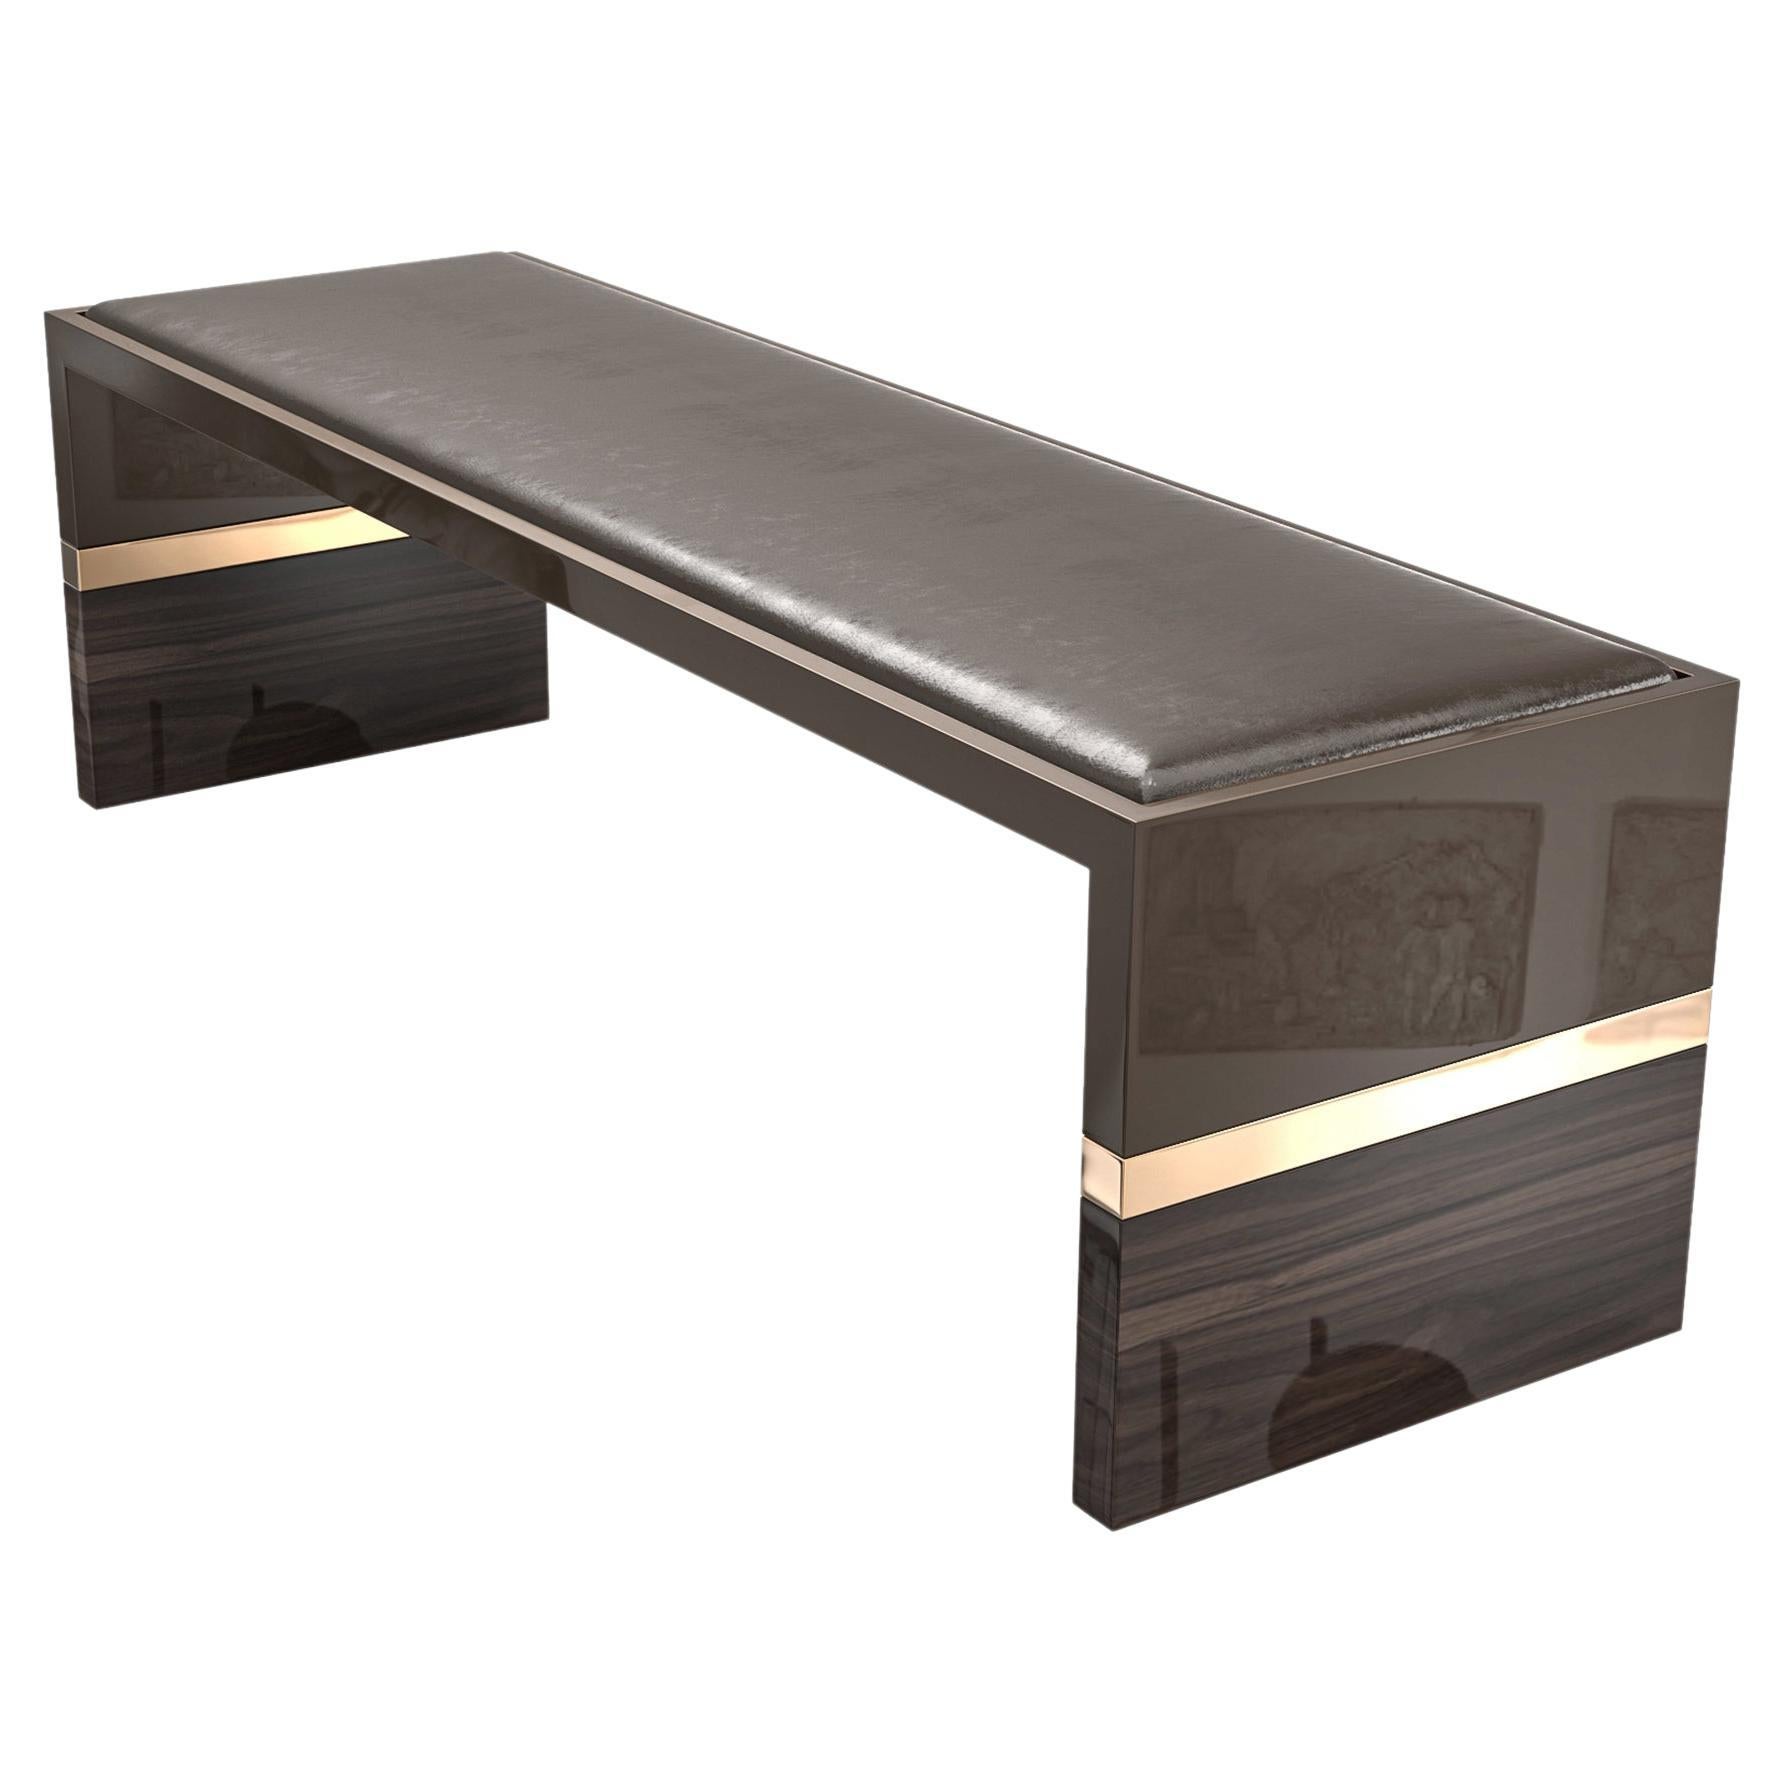 "Galeone" Bench with Stainless Steel, Walnut and Bronze Details, Istanbul For Sale